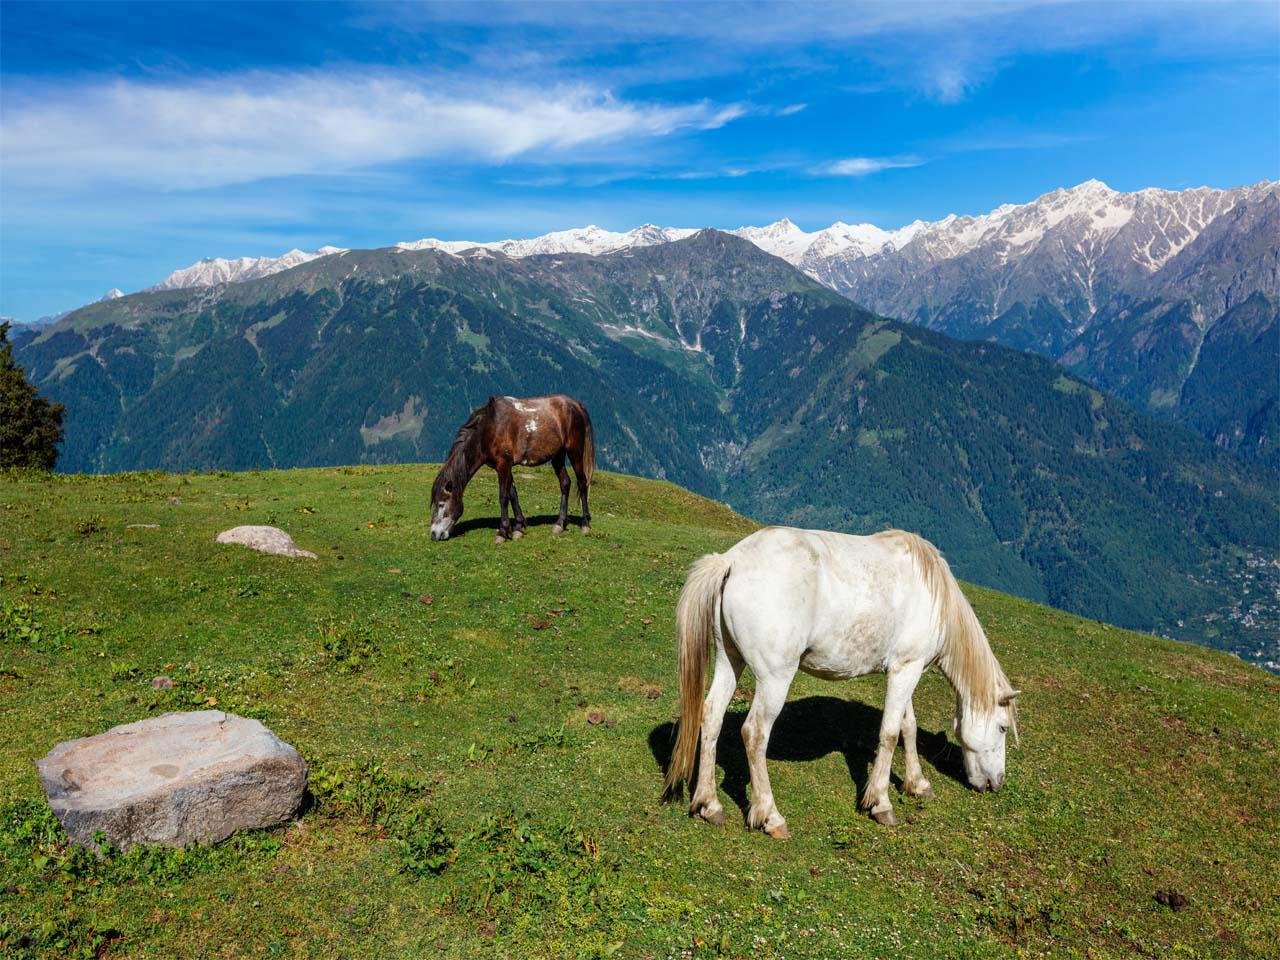 manali tour packages from hyderabad